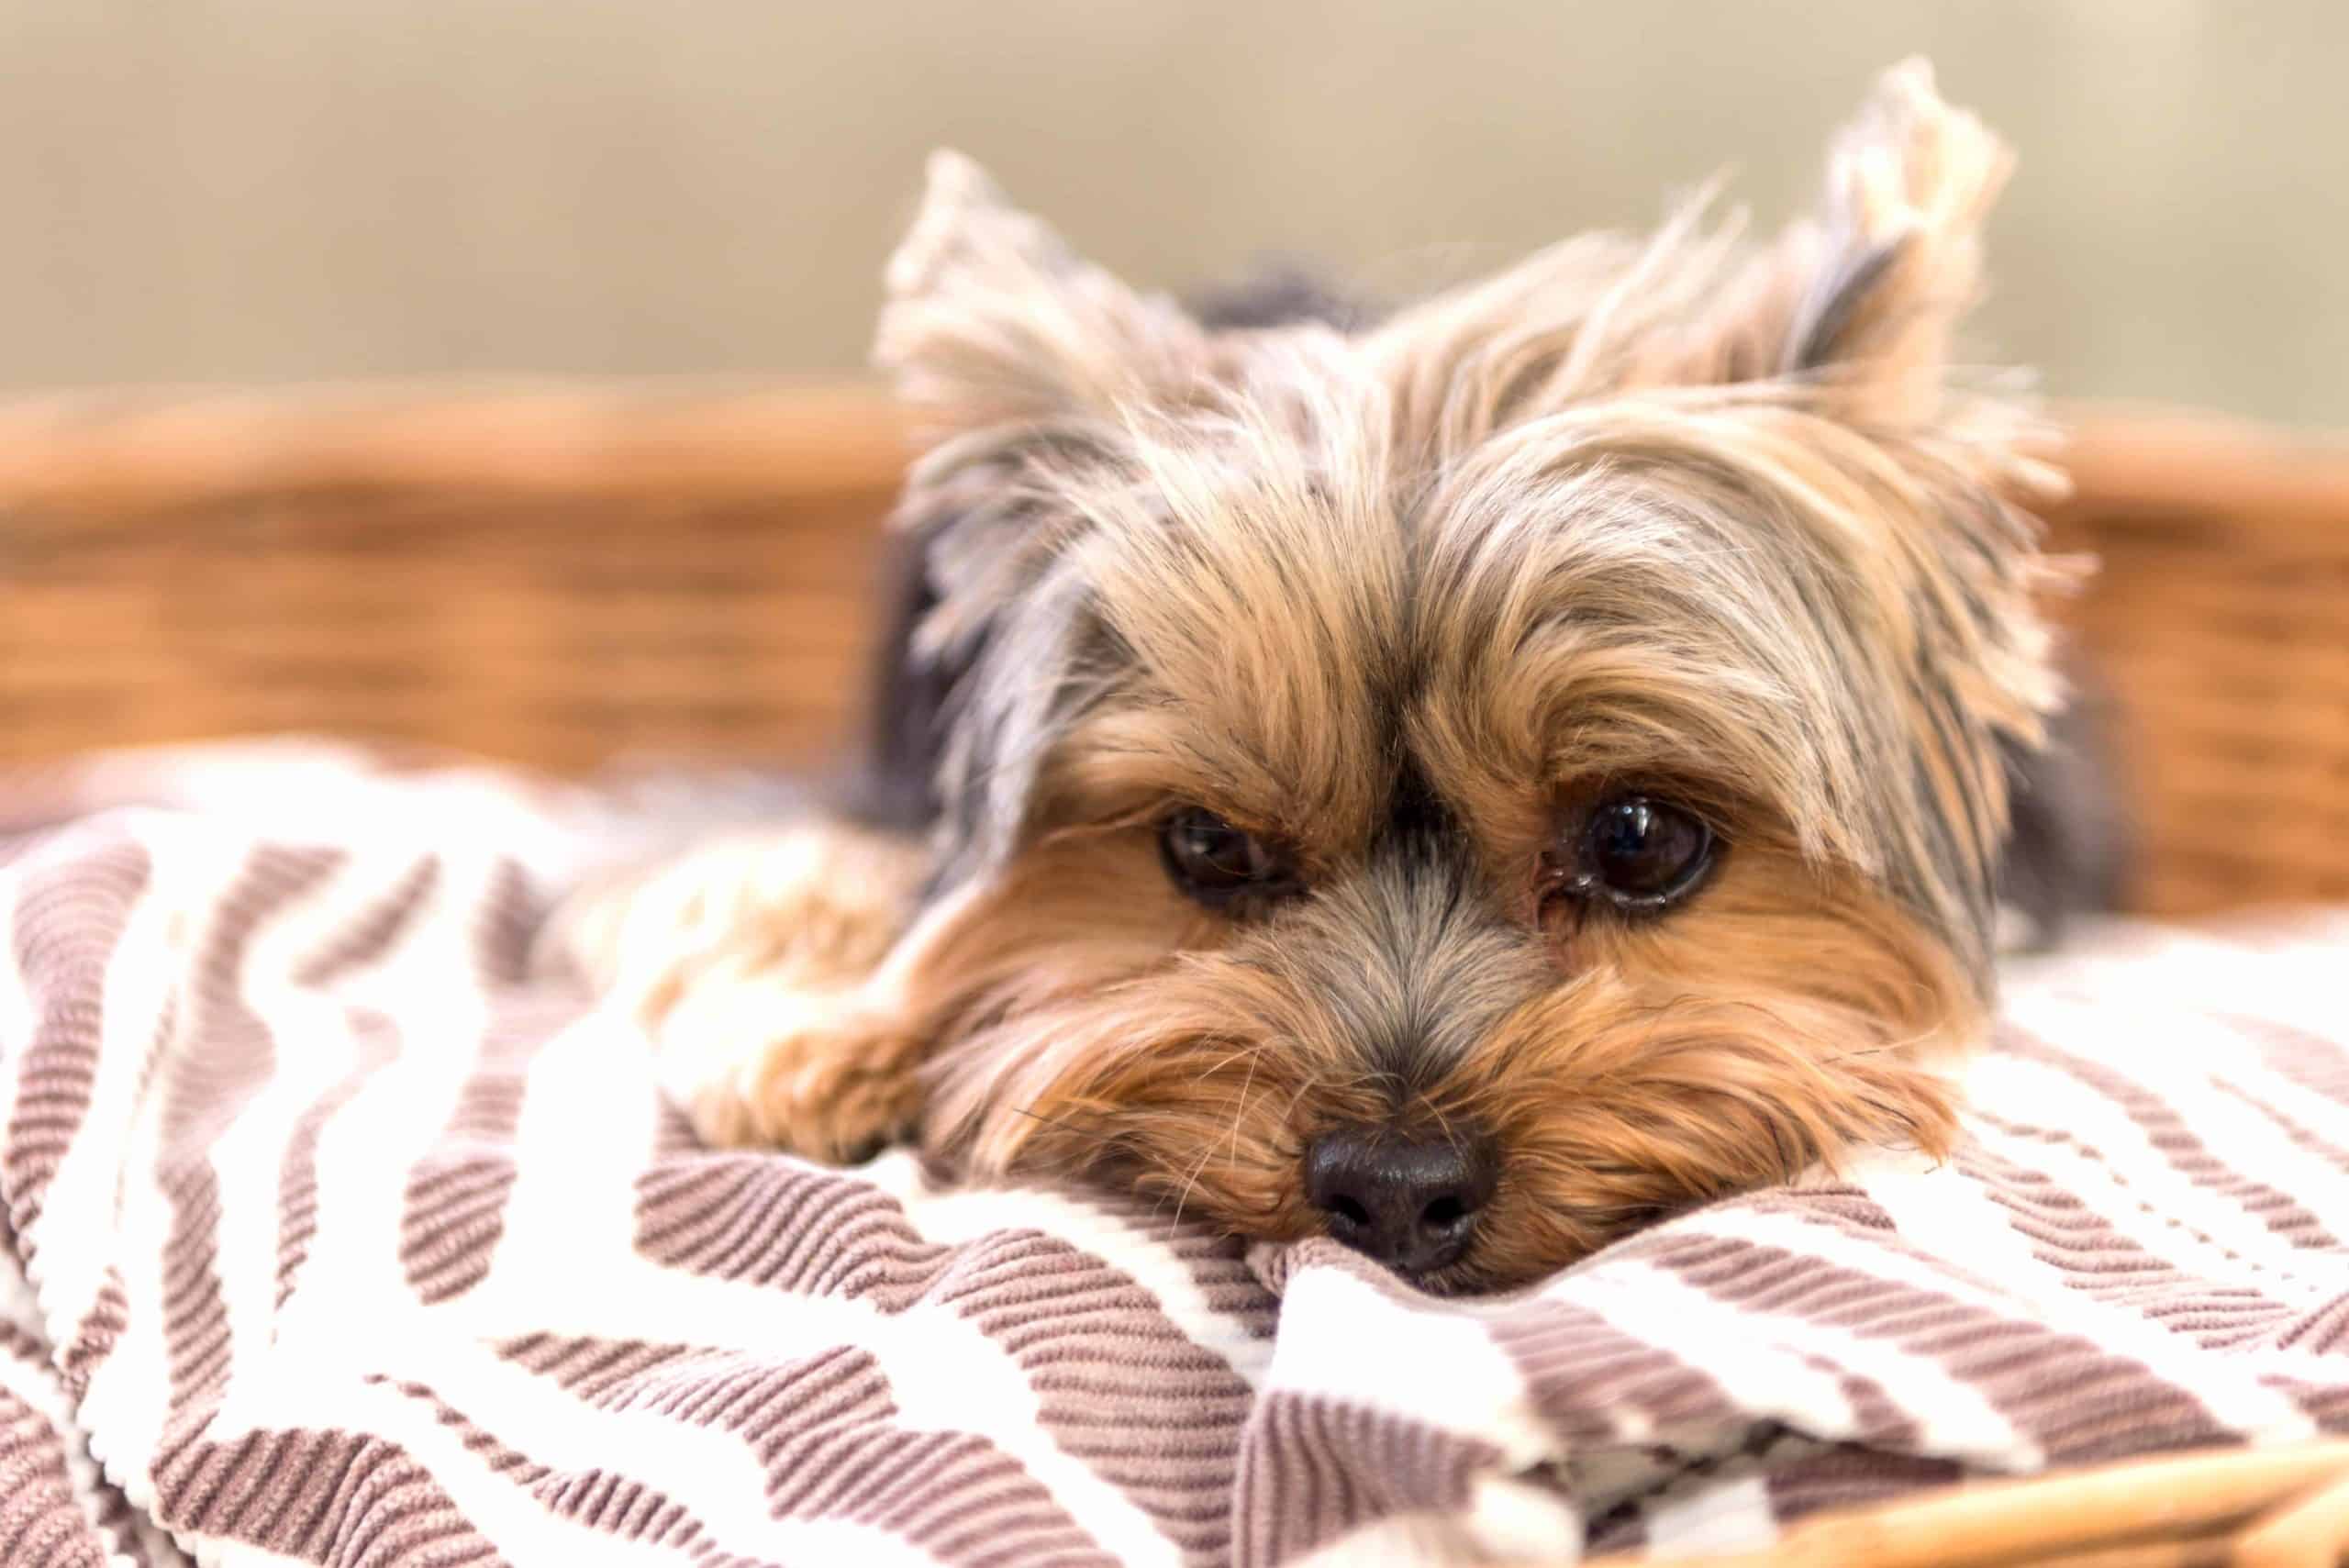 Yorkie snuggles into its basket. Couch potato dogs like Yorkies require around 30% fewer calories as opposed to active and younger pets.